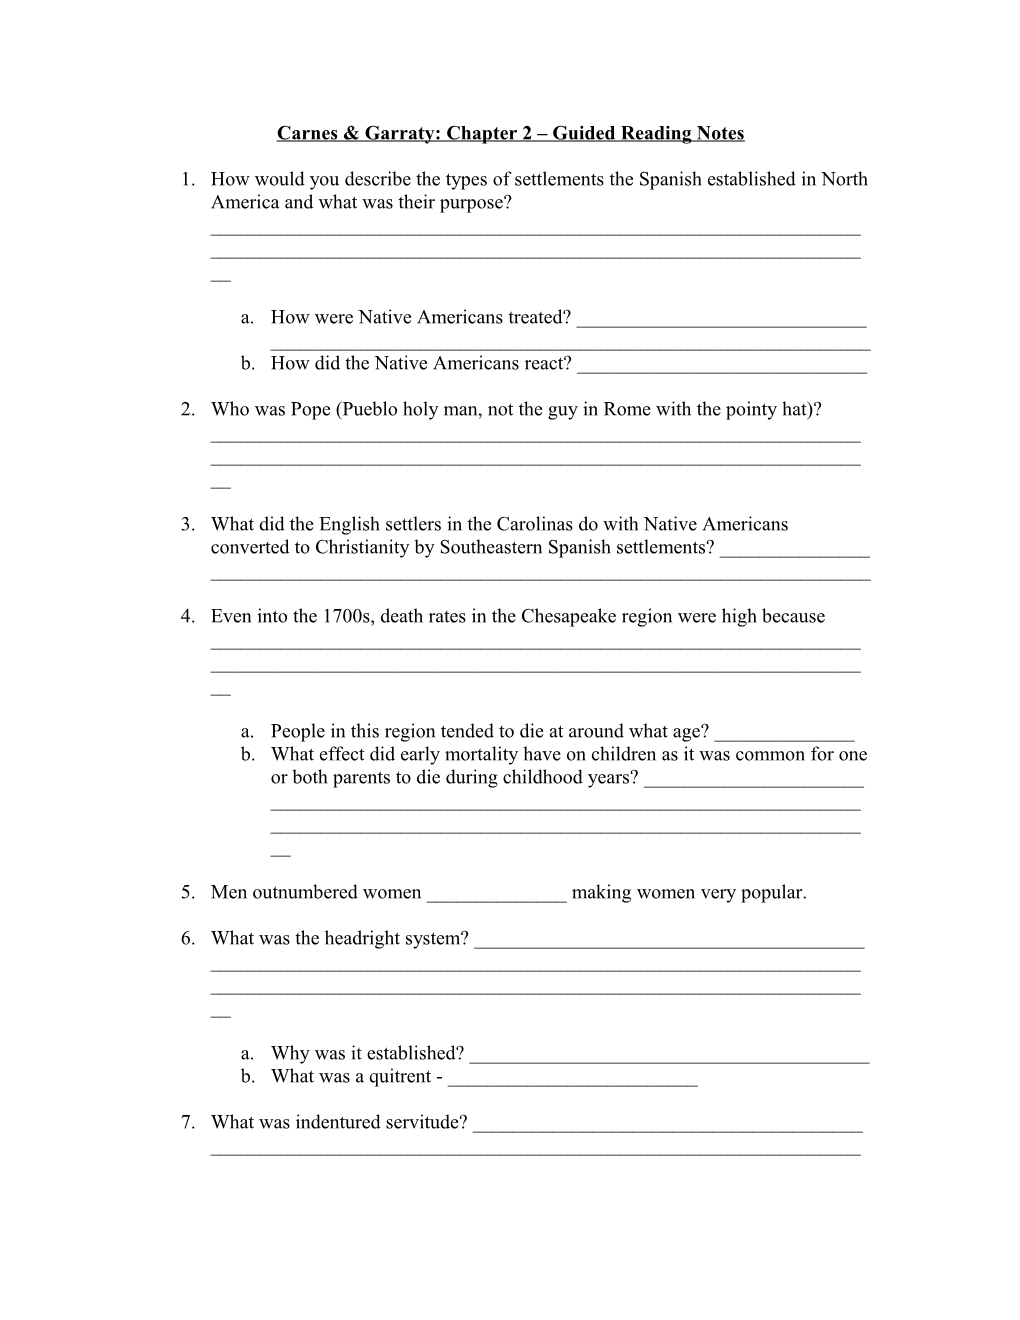 Carnes & Garraty: Chapter 2 Guided Reading Notes